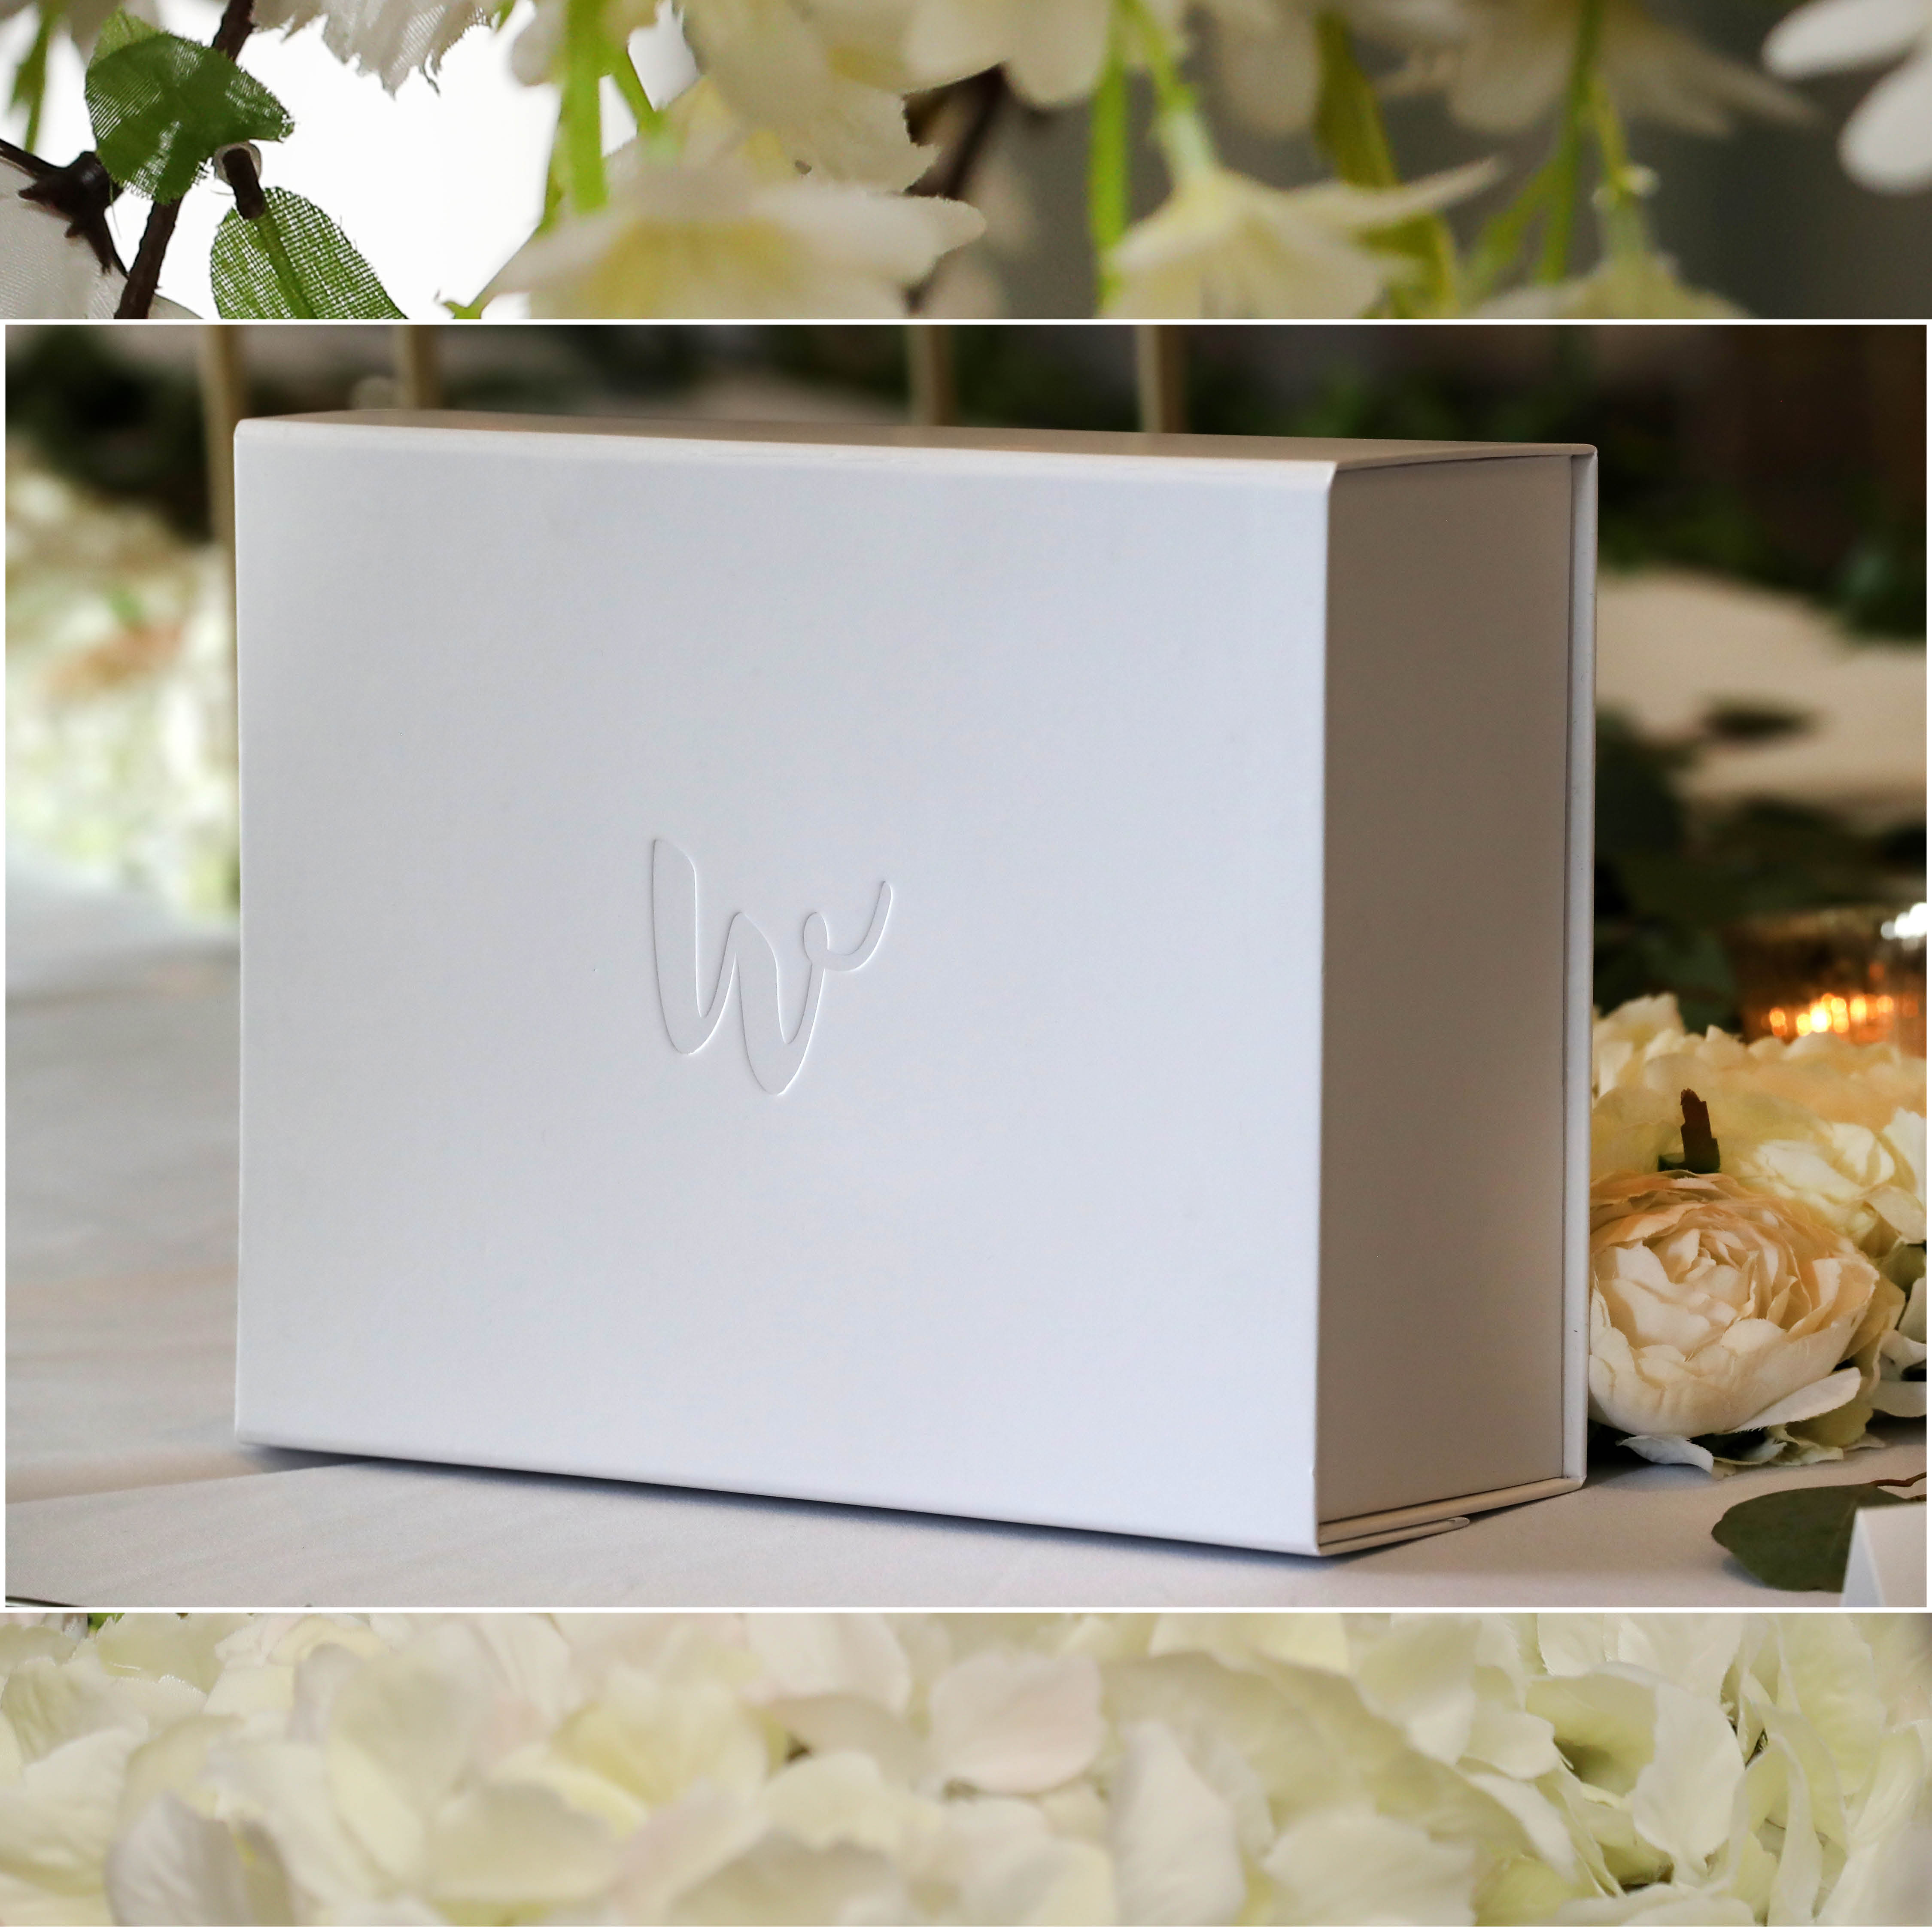 Things You'll Remember Your Big Day By in Years to Come, wedding keepsake box